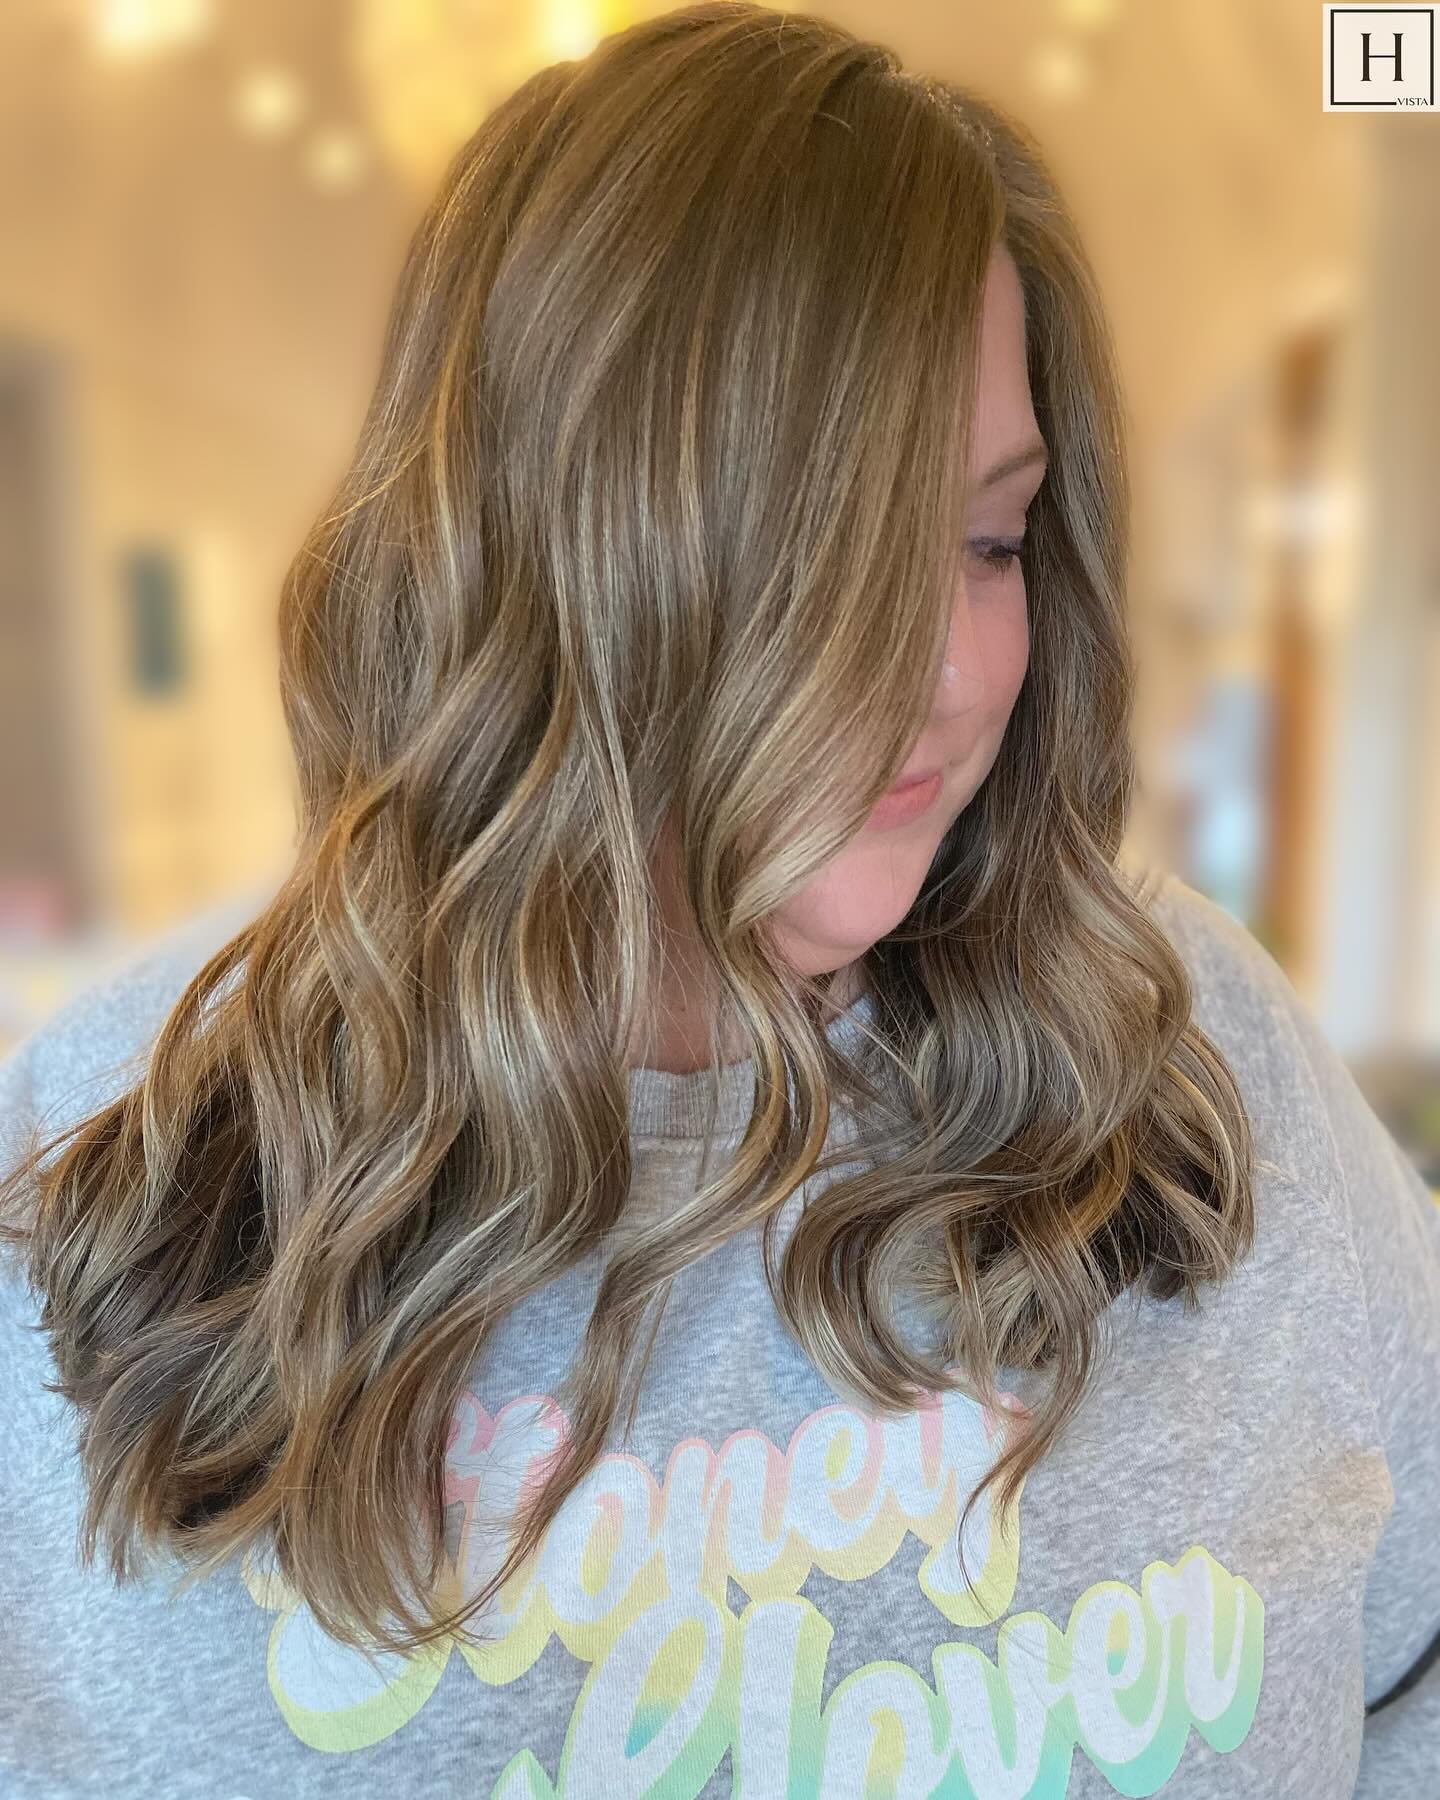 Hair couldn&rsquo;t be more perfect if it tried 😍

Stylist: @styledbyali.mac 

#hair #hairsalon #hairstylist #thevistasc #columbiasc #downtowncola #hydesalon #hydevista #sodacity #perfecthair